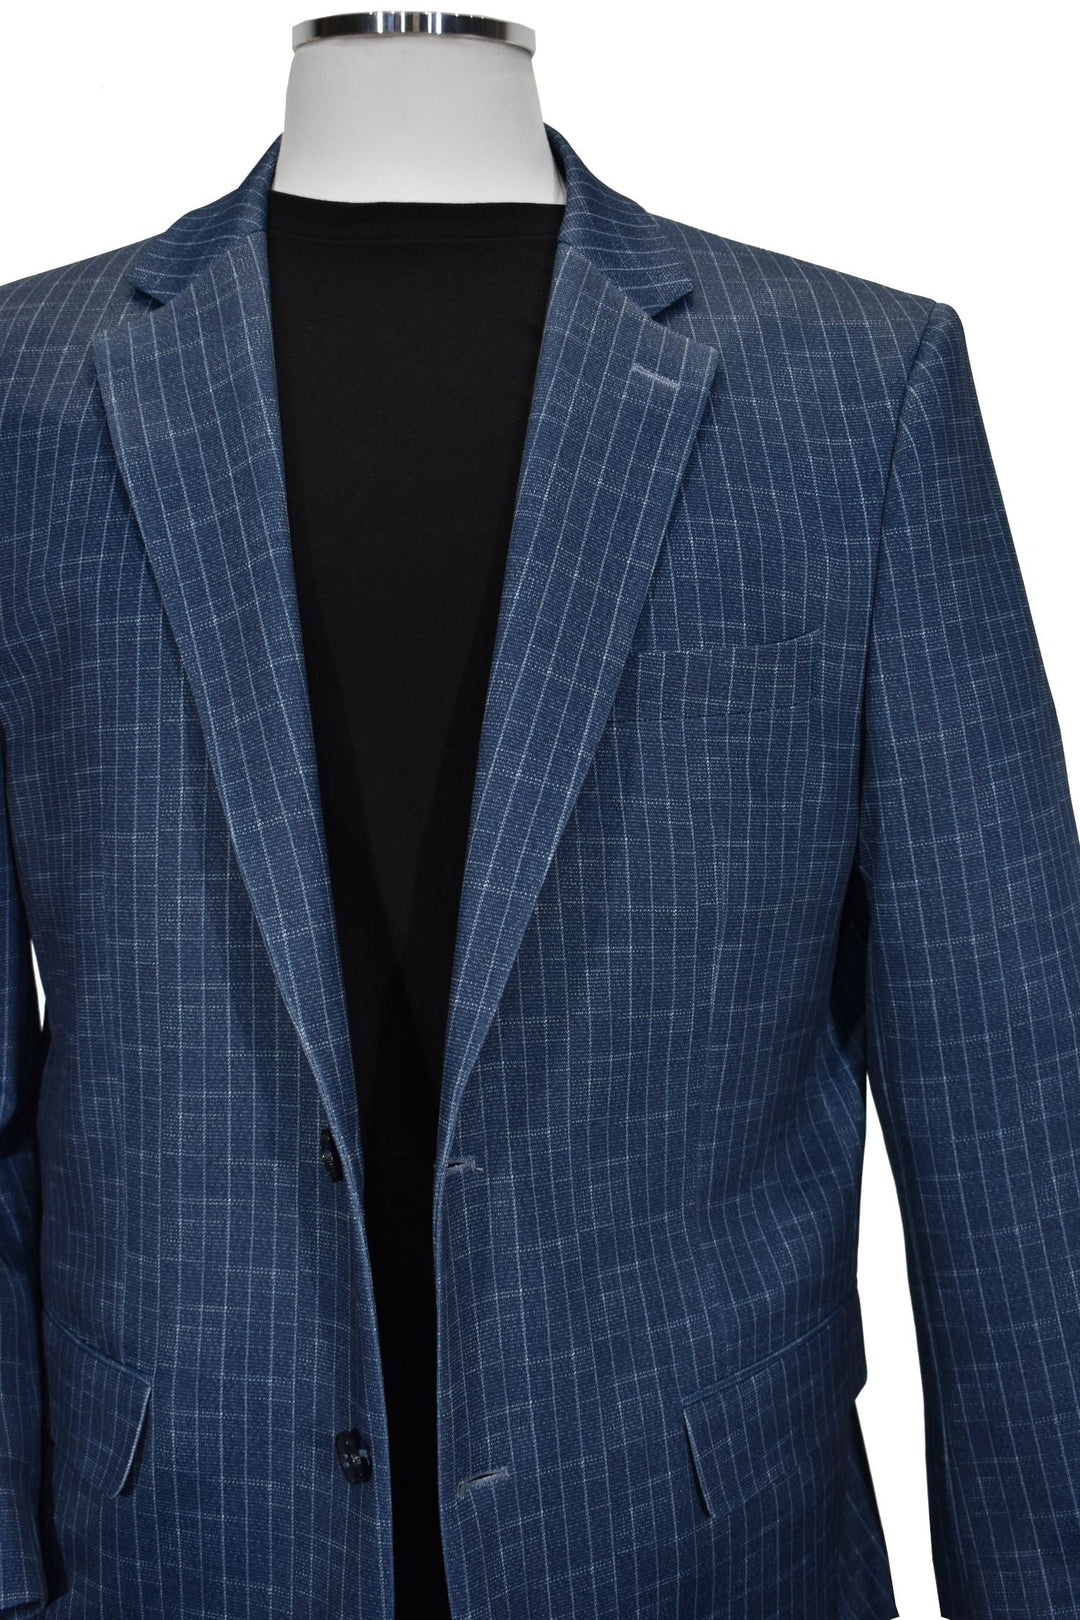 A traveler sport coat is a great item for a casual hip lifestyle. The outer fabric is a polyester microfiber with lycra for stretch. The result is a comfortable jacket that moves with your natural movements, does not wrinkle and can be folded up tight to travel anywhere without needing pressing.